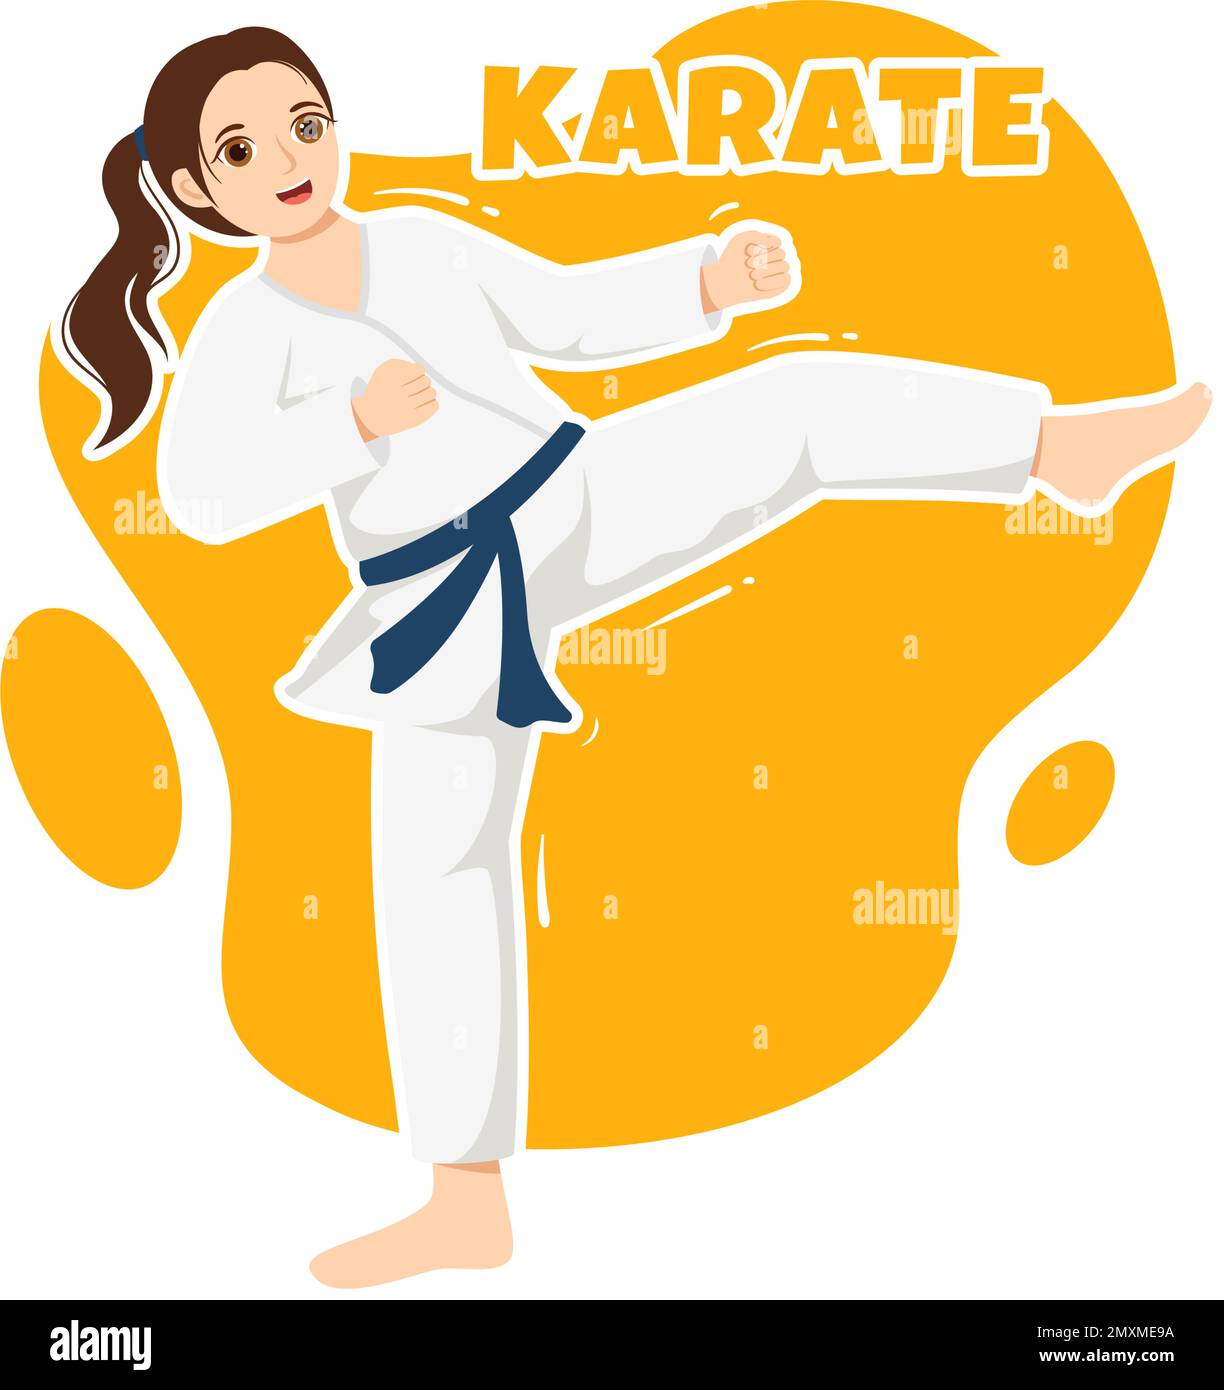 People Doing Some Basic Karate Martial Arts Moves, Fighting Pose and ...